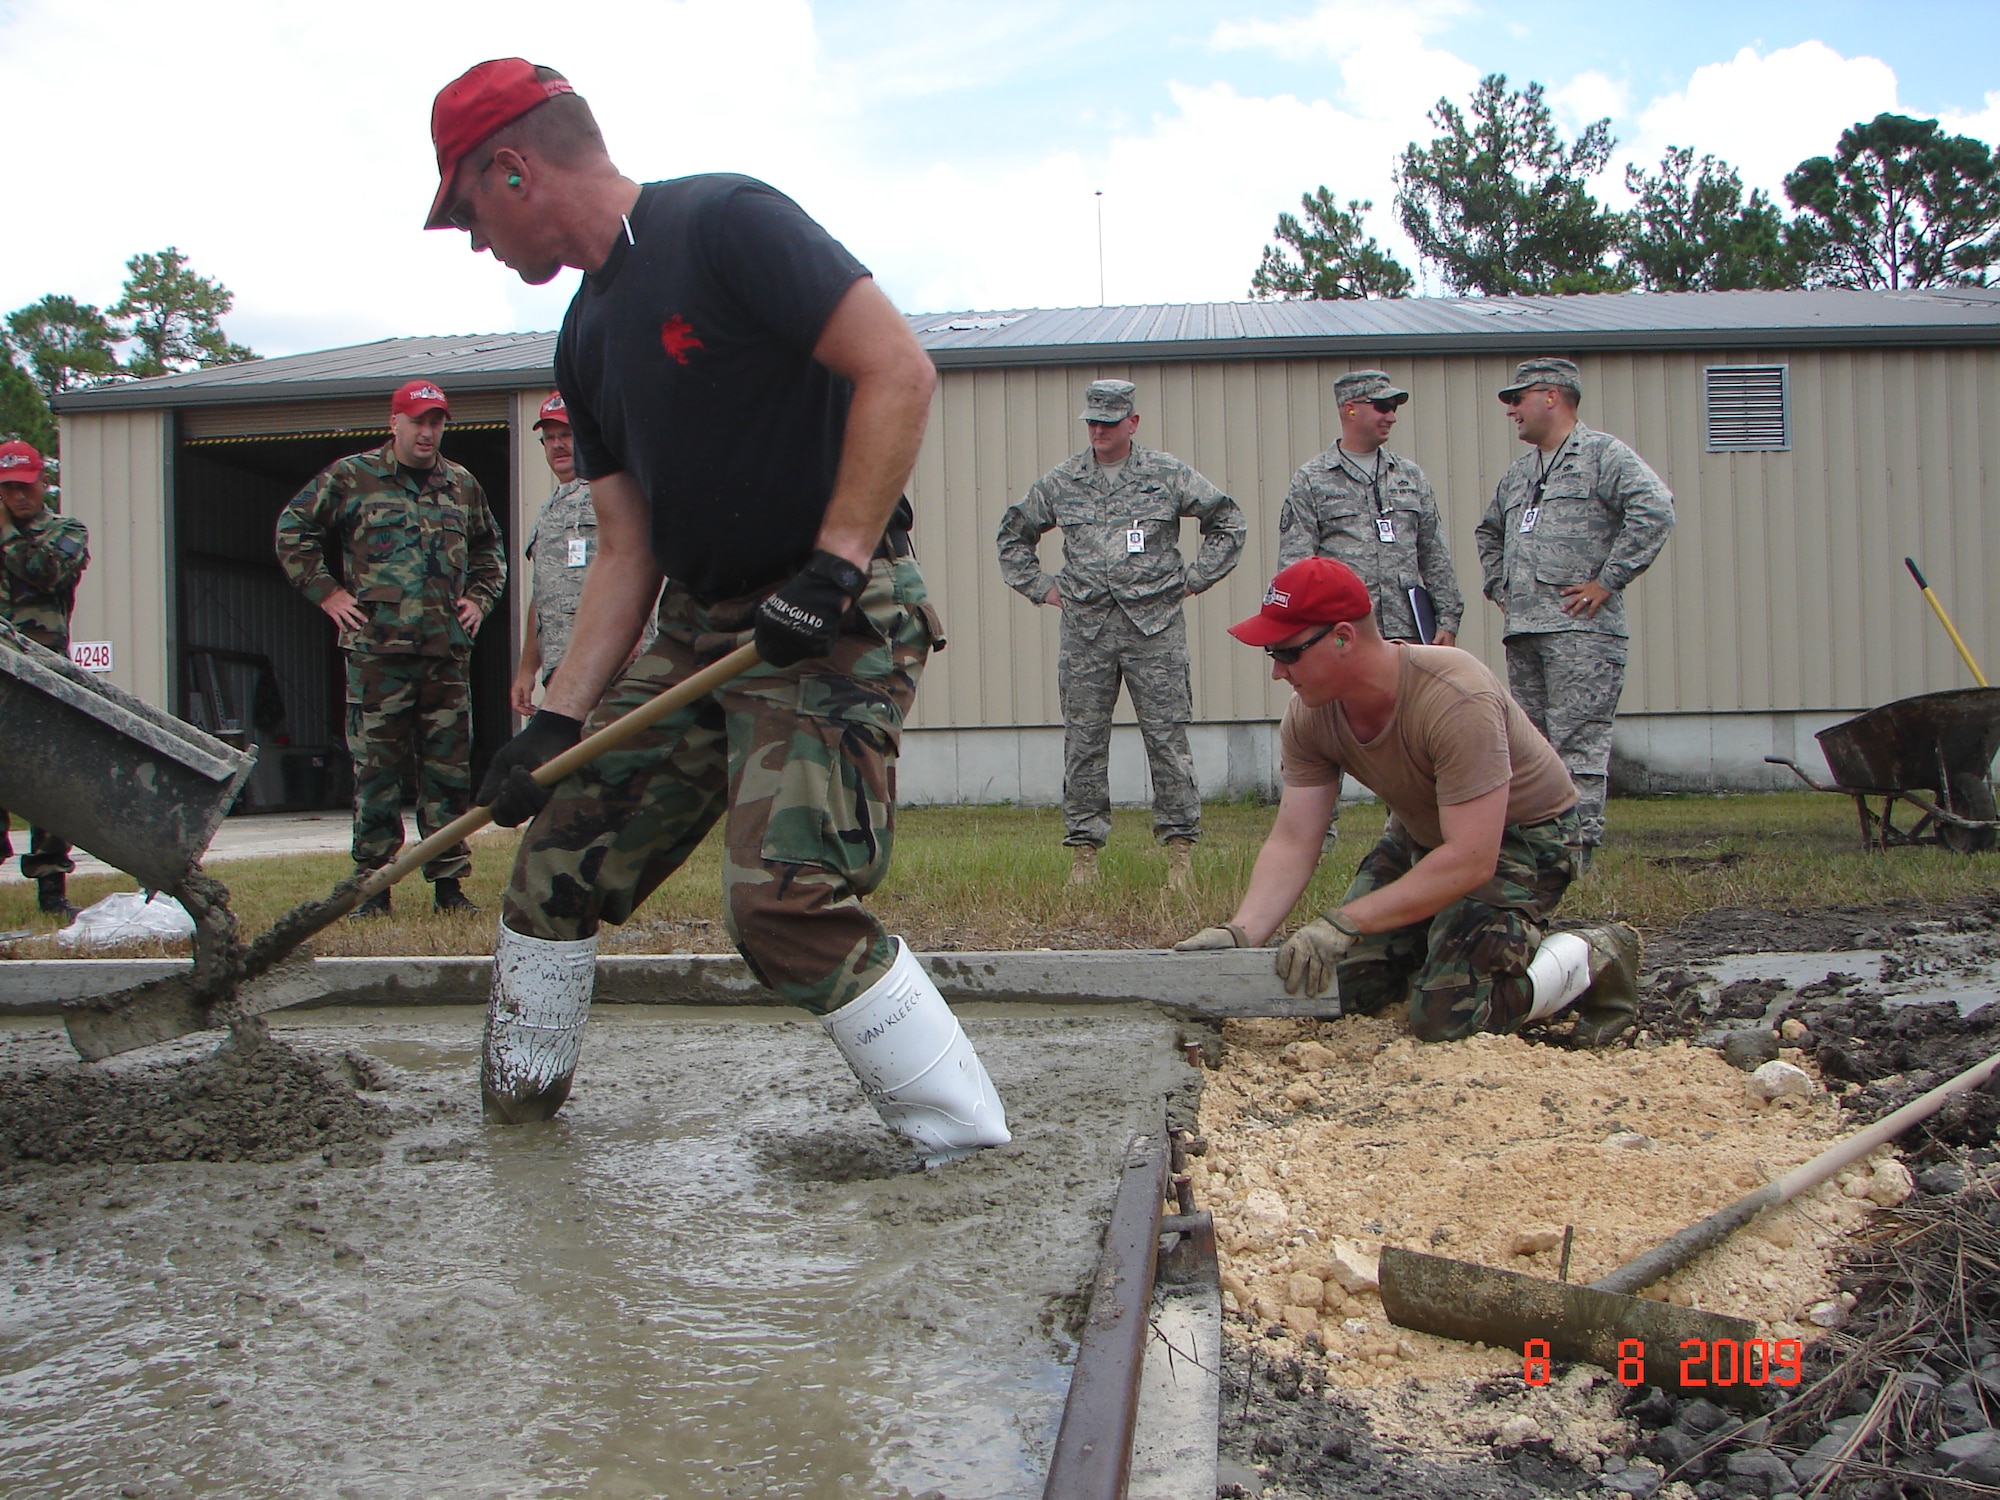 SSGT Mark Van Kleek (on rake) and SSGT Kevin Barfield (on screed) assist in a "concrete pour" at the 202nd RED HORSE compound at Camp Blanding during an August 2009 Unit Compliance Inspection, while UCI Team Chief Colonel Mark Moore and UCI Team Members MSGT Shane Rogers and Lt.Col. Erik Lagerquist evaluate the operation.  Colonel Moore stated the 202nd RED HORSE did "very, very well" in the Unit Compliance Inspection.
